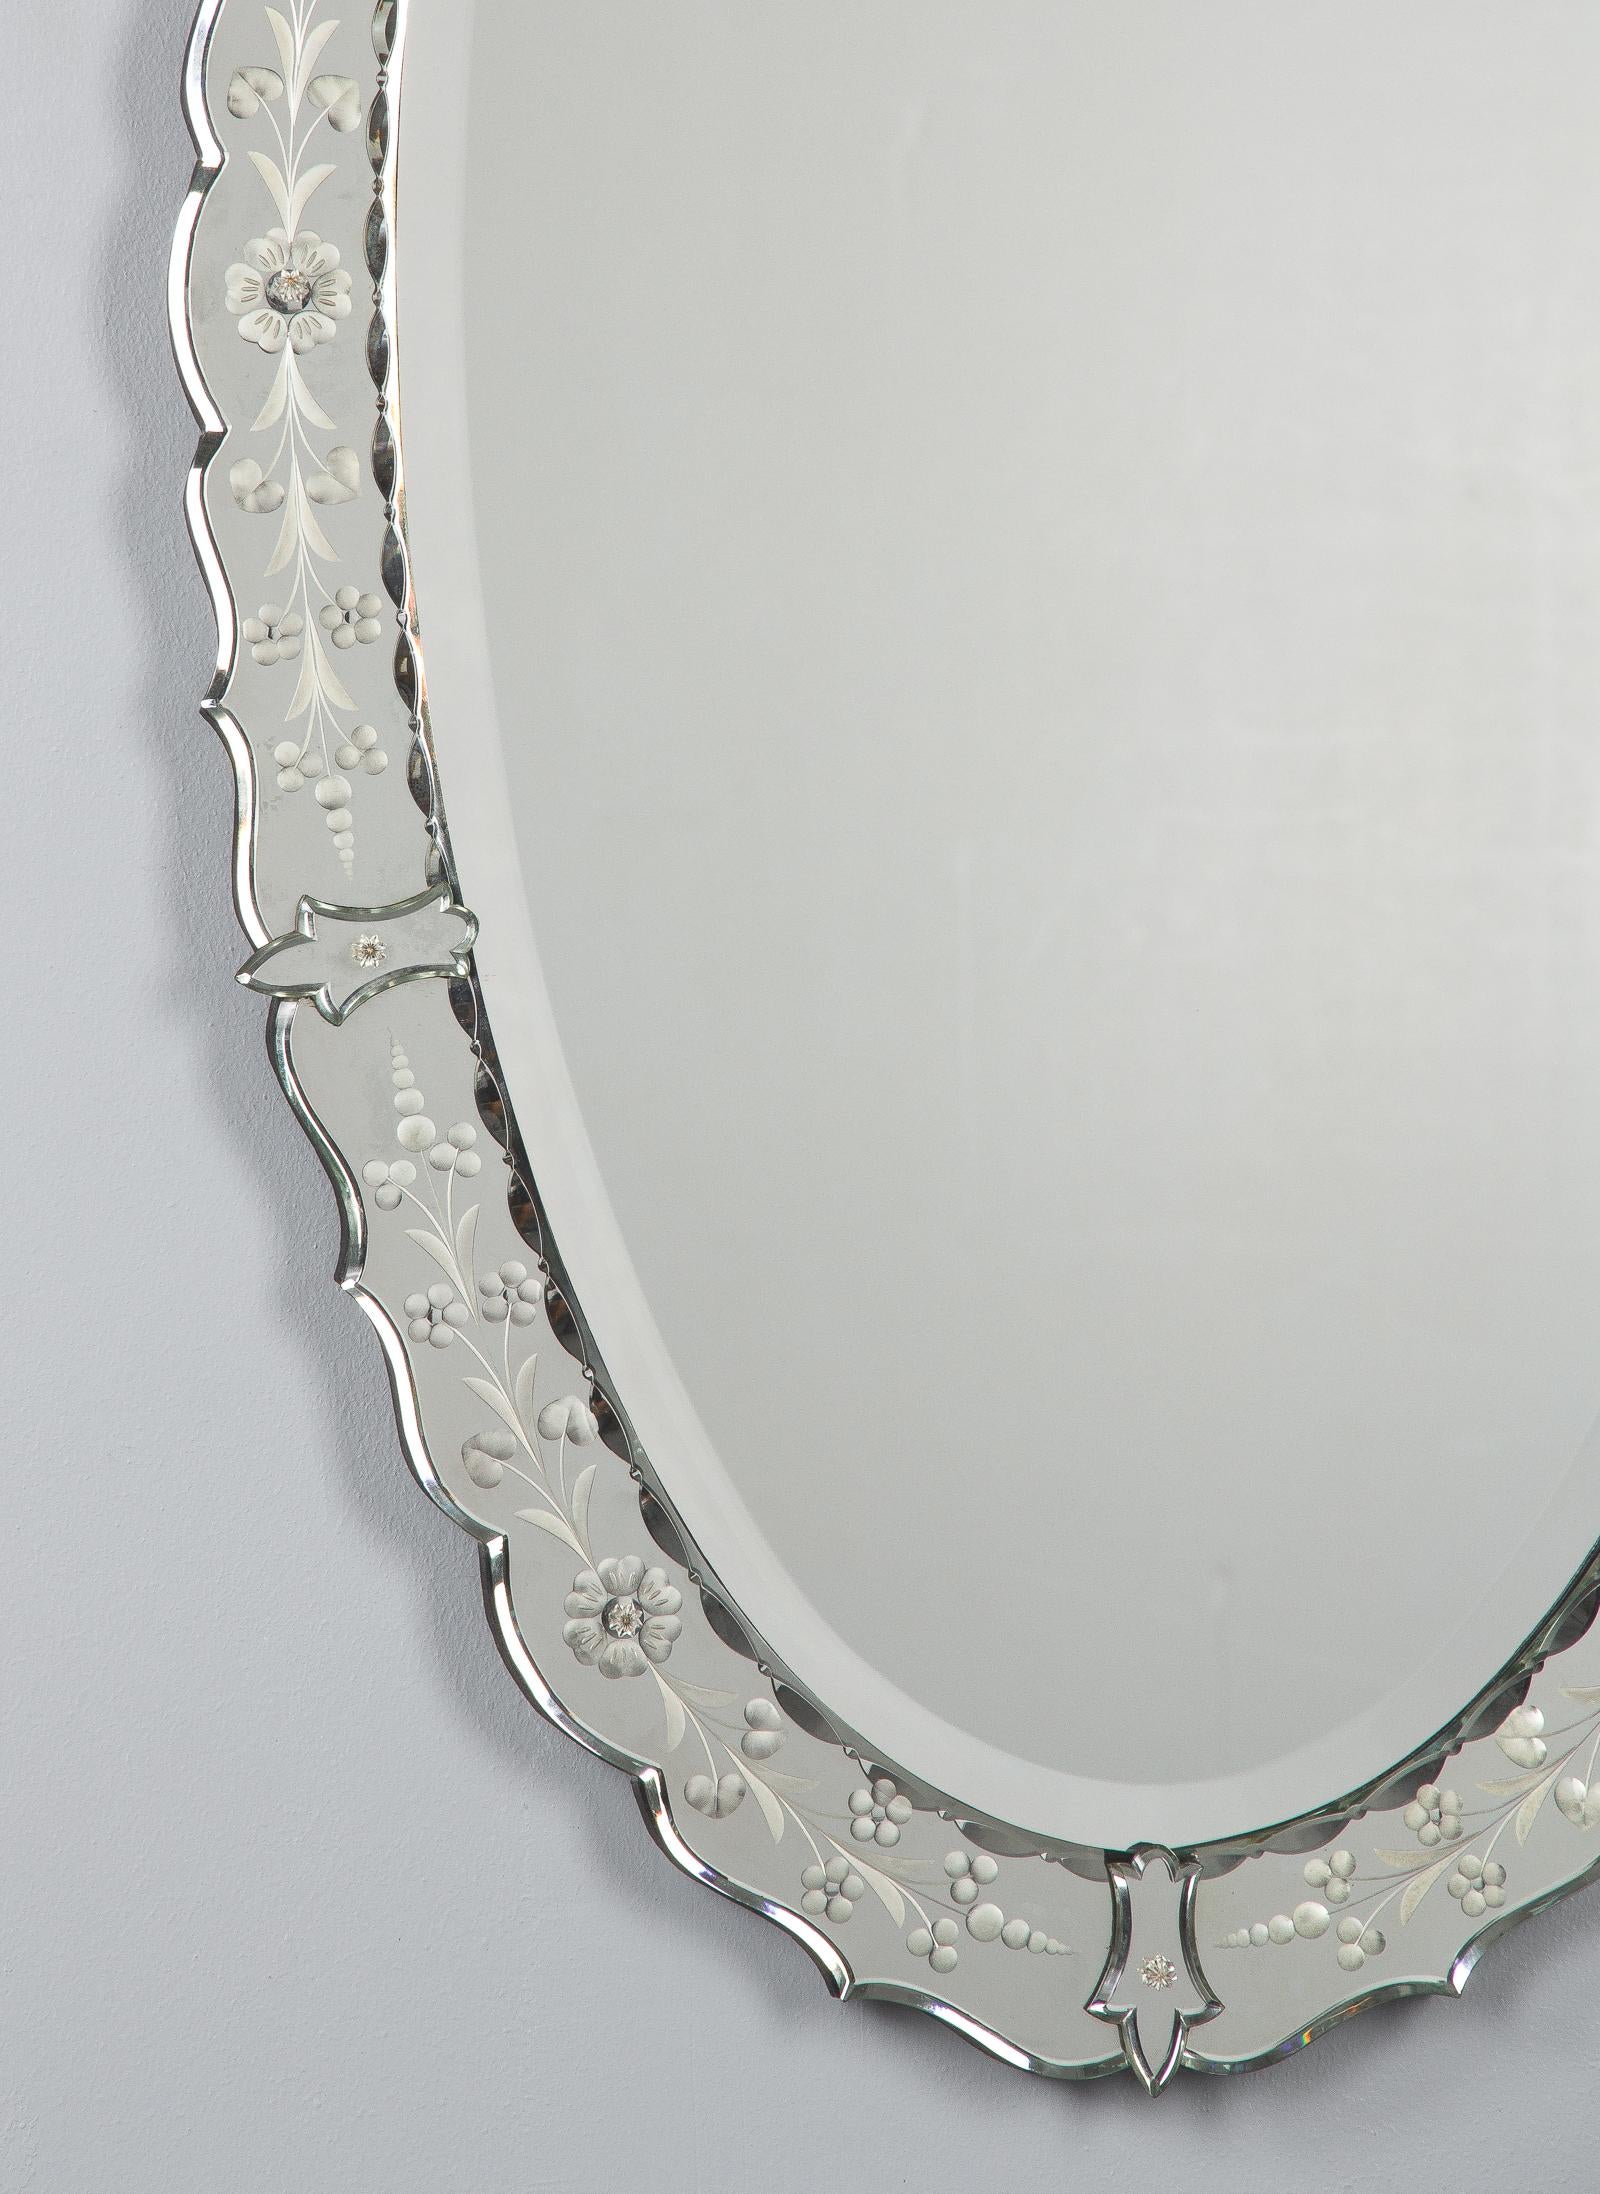 Beveled French Midcentury Oval Venetian Glass Mirror, 1950s